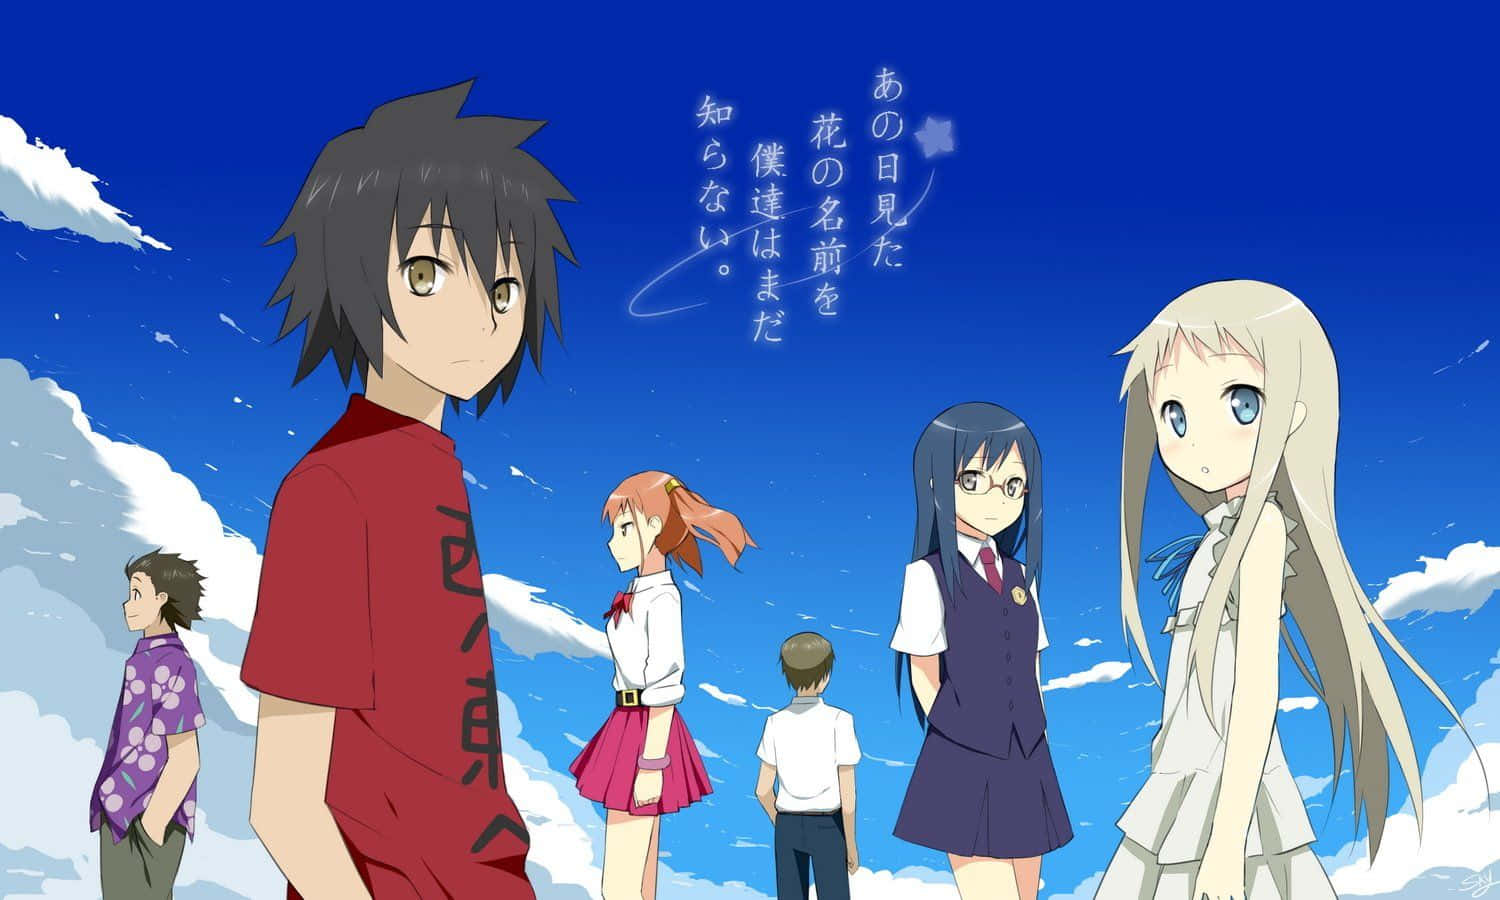 “Anohana – Friends come together, even after facing pain and loss”